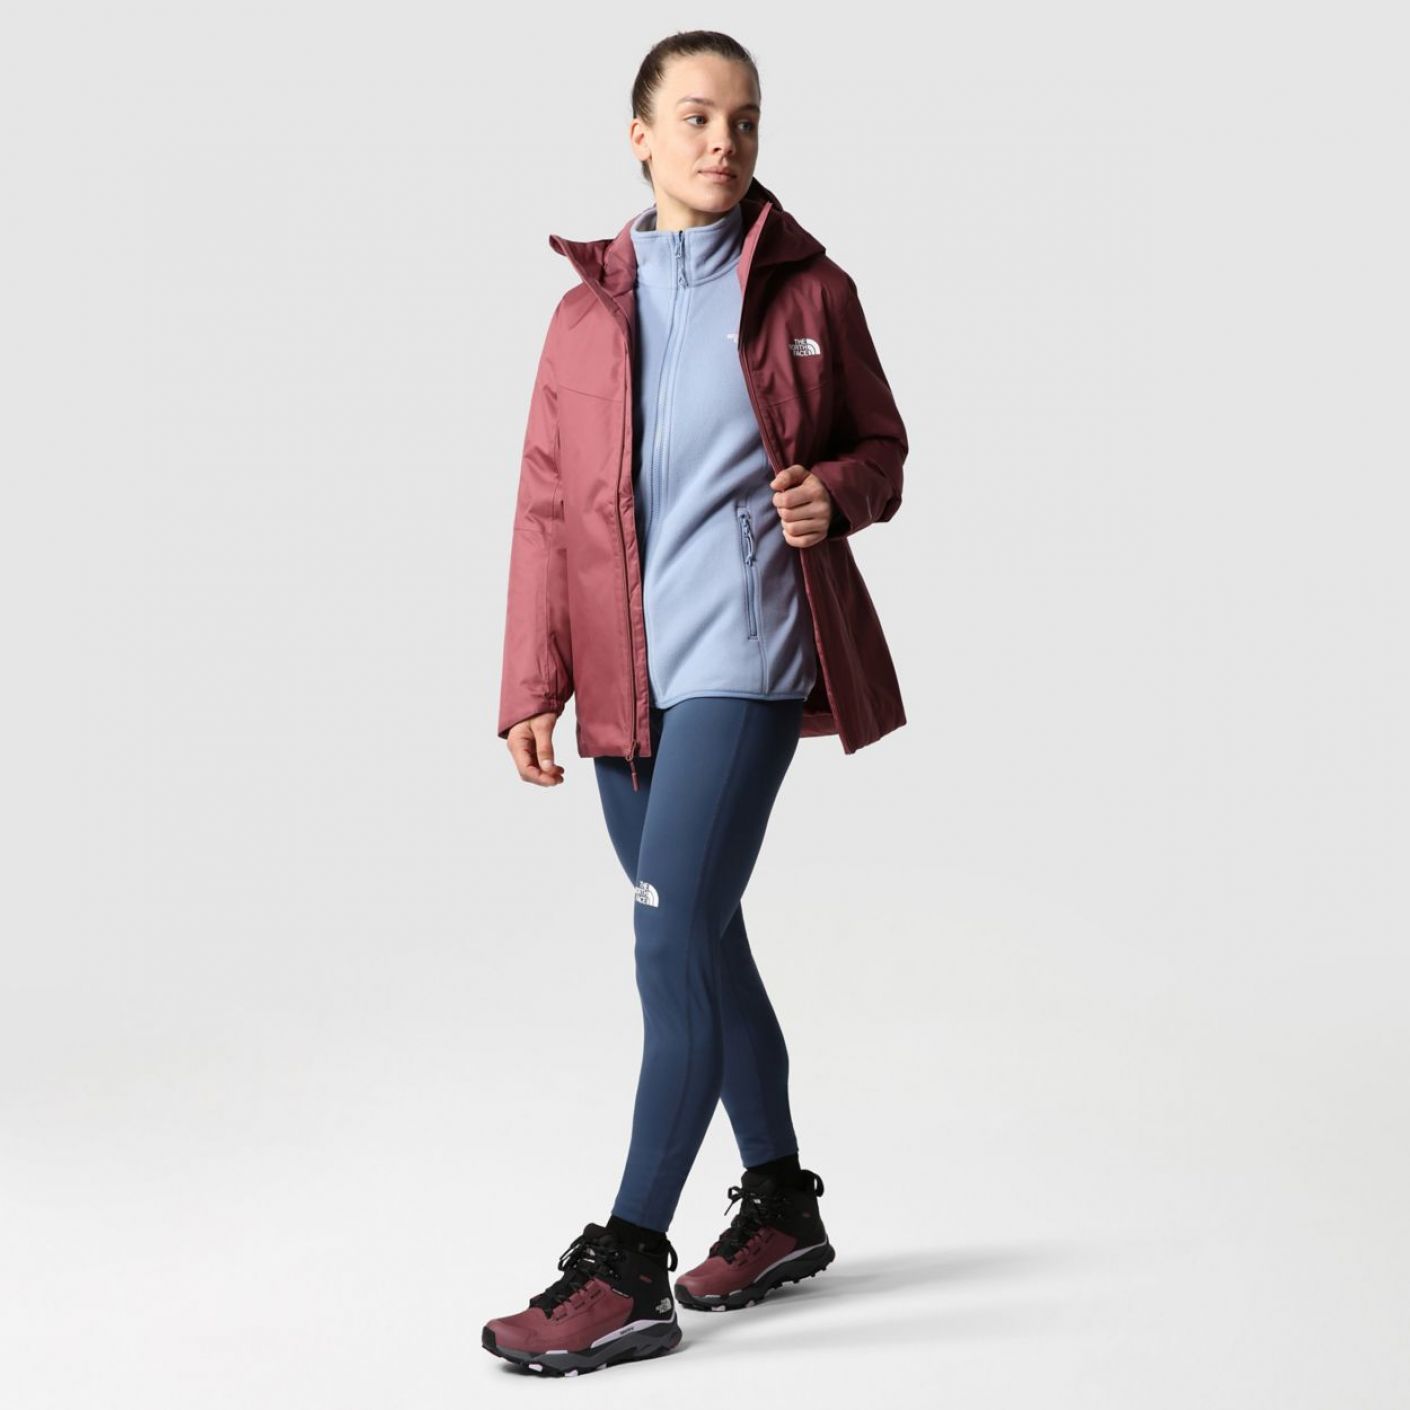 The North Face Quest Insulated Jacket Donna Wild Ginger